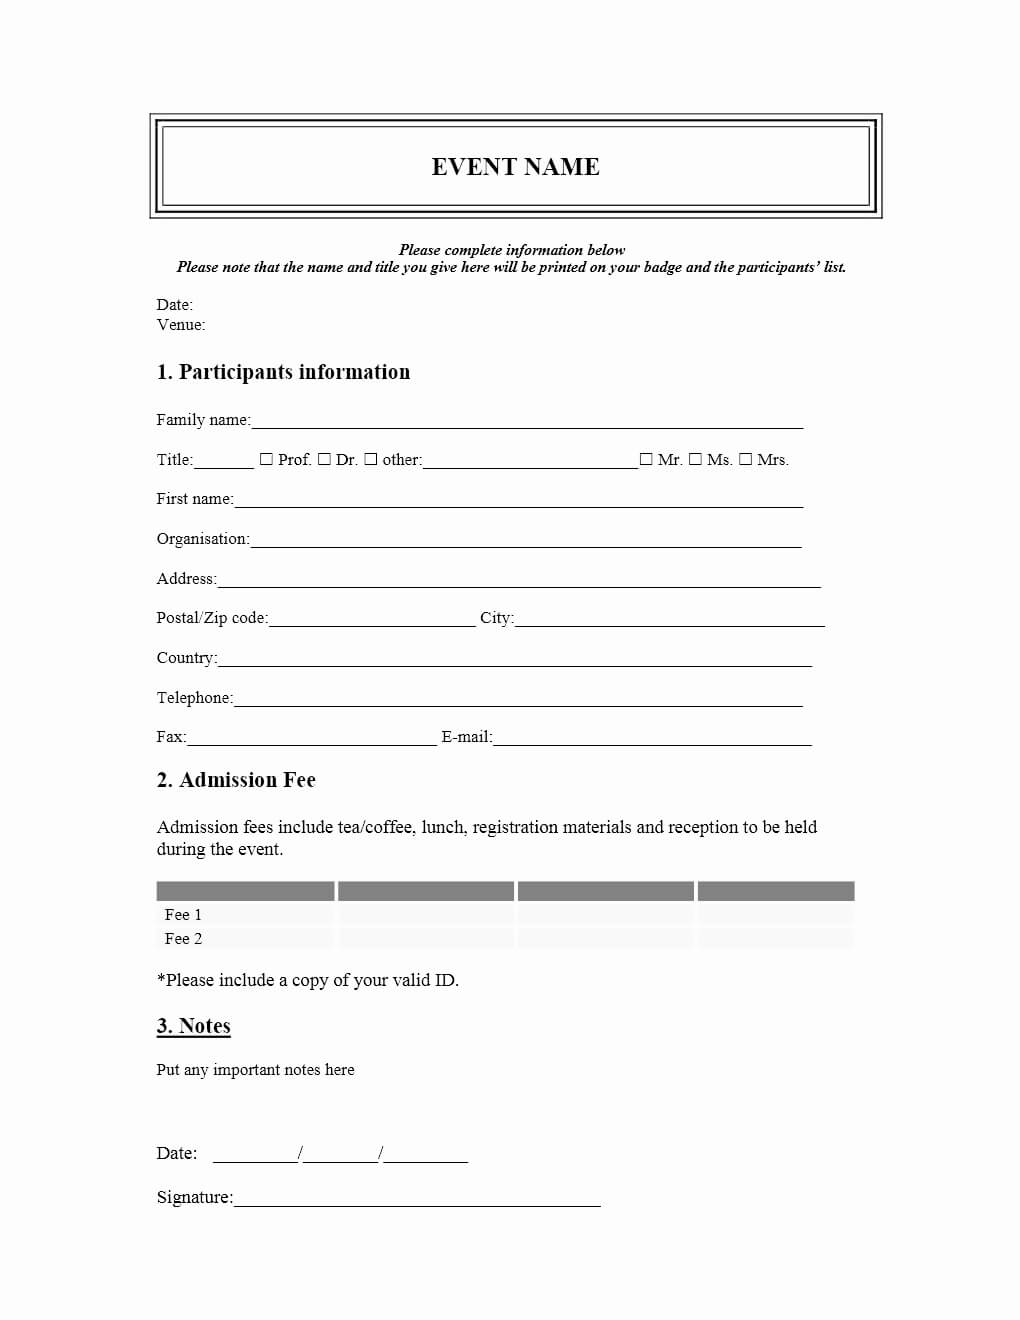 Conference Registration Form Template Word Lovely Regarding Registration Form Template Word Free